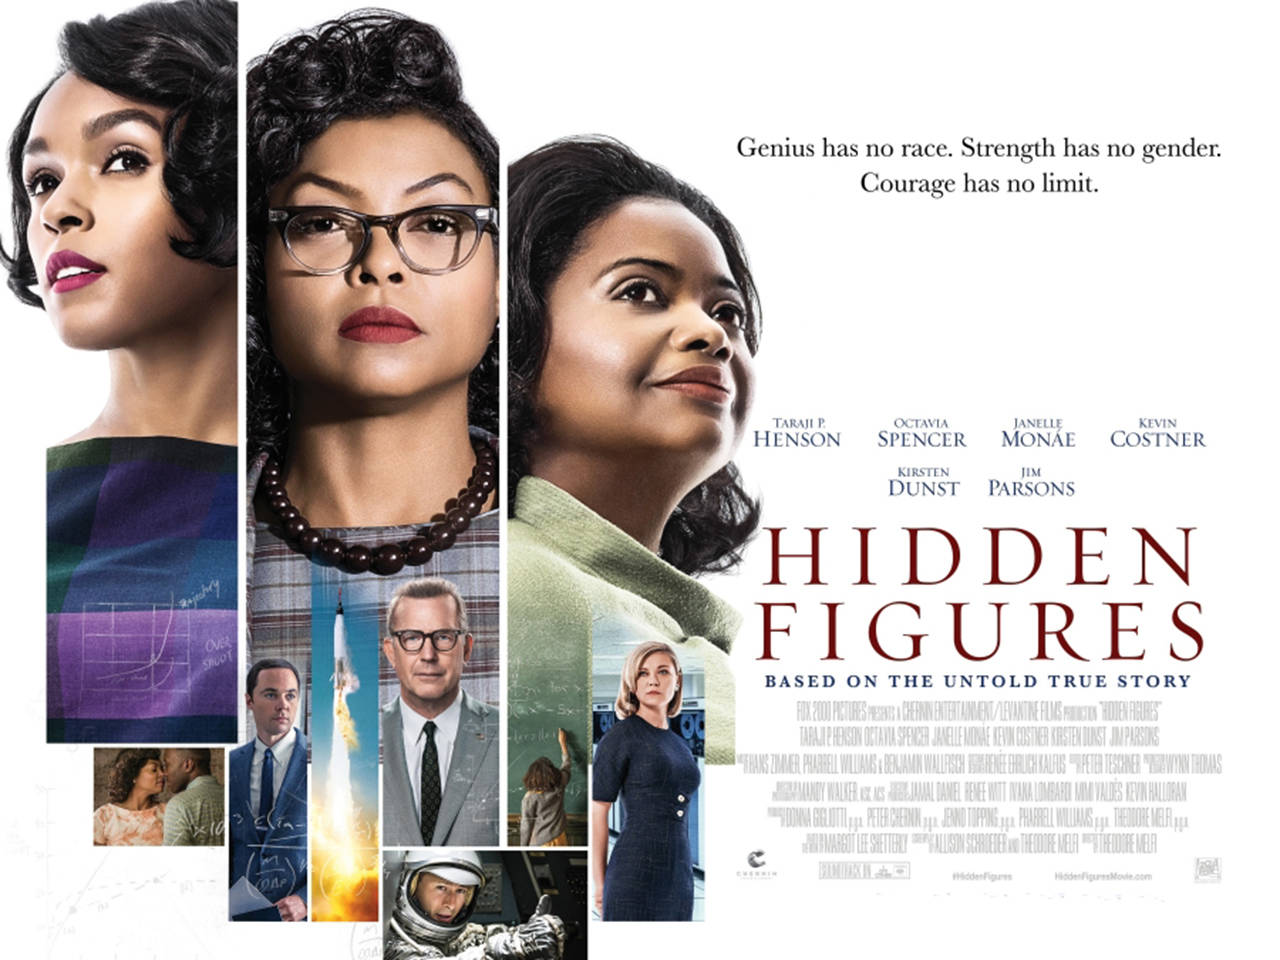 Fox 2000 Pictures                                Best Picture chances for “Hidden Figures” were torpedoed in part by activists who complained about historical inaccuracies and the inclusion of sympathetic white characters.